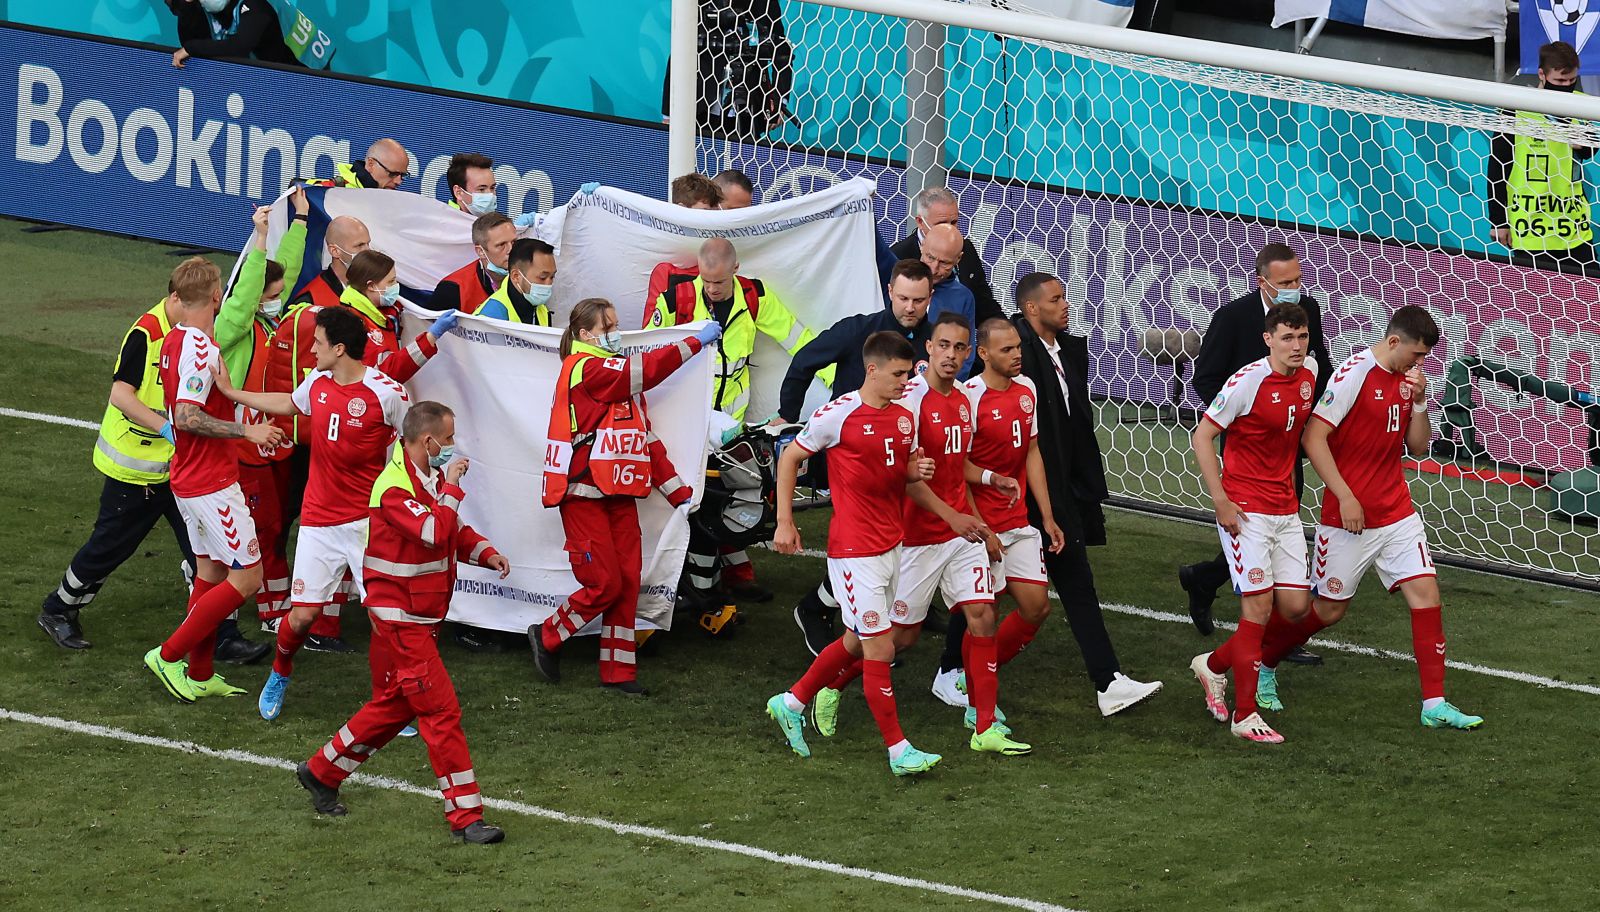 epa09265402 Christian Eriksen of Denmark receives medical attention during the UEFA EURO 2020 group B preliminary round soccer match between Denmark and Finland in Copenhagen, Denmark, 12 June 2021.  EPA/Wolfgang Rattay / POOL (RESTRICTIONS: For editorial news reporting purposes only. Images must appear as still images and must not emulate match action video footage. Photographs published in online publications shall have an interval of at least 20 seconds between the posting.)